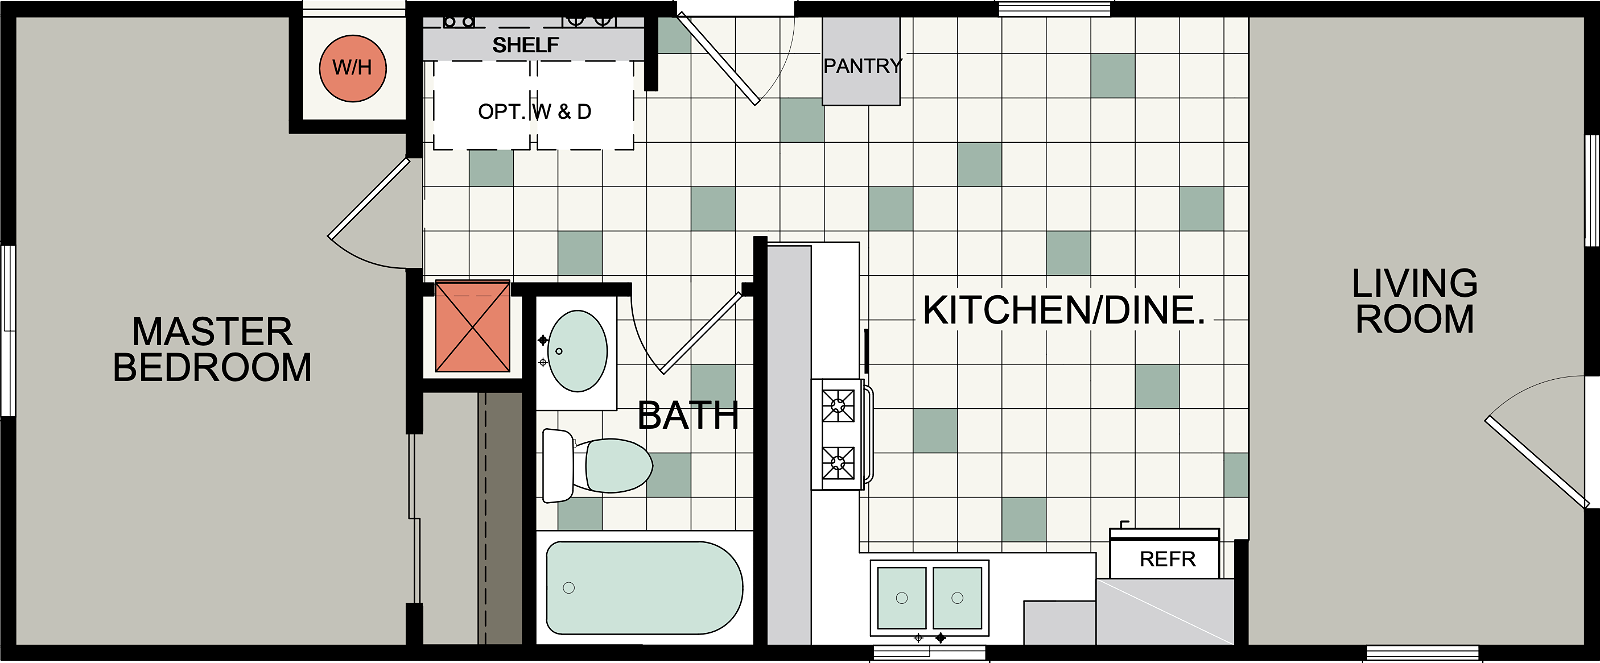 Bd 82 floor plan cropped and hero home features